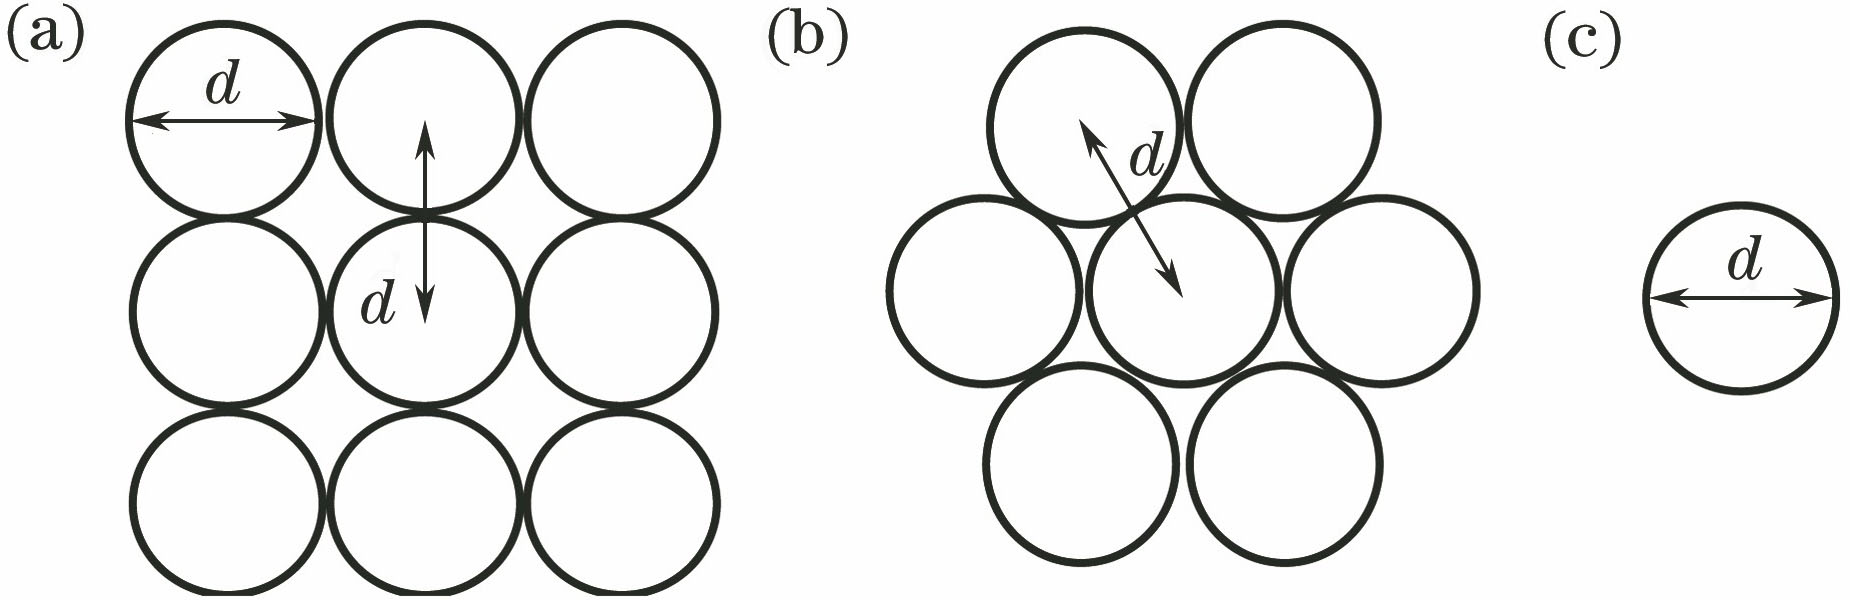 Schematic of different beam arrangements. (a) 3×3 beam array with rectangle distribution; (b) 7 beam array with radial distribution; (c) single Gaussian beam